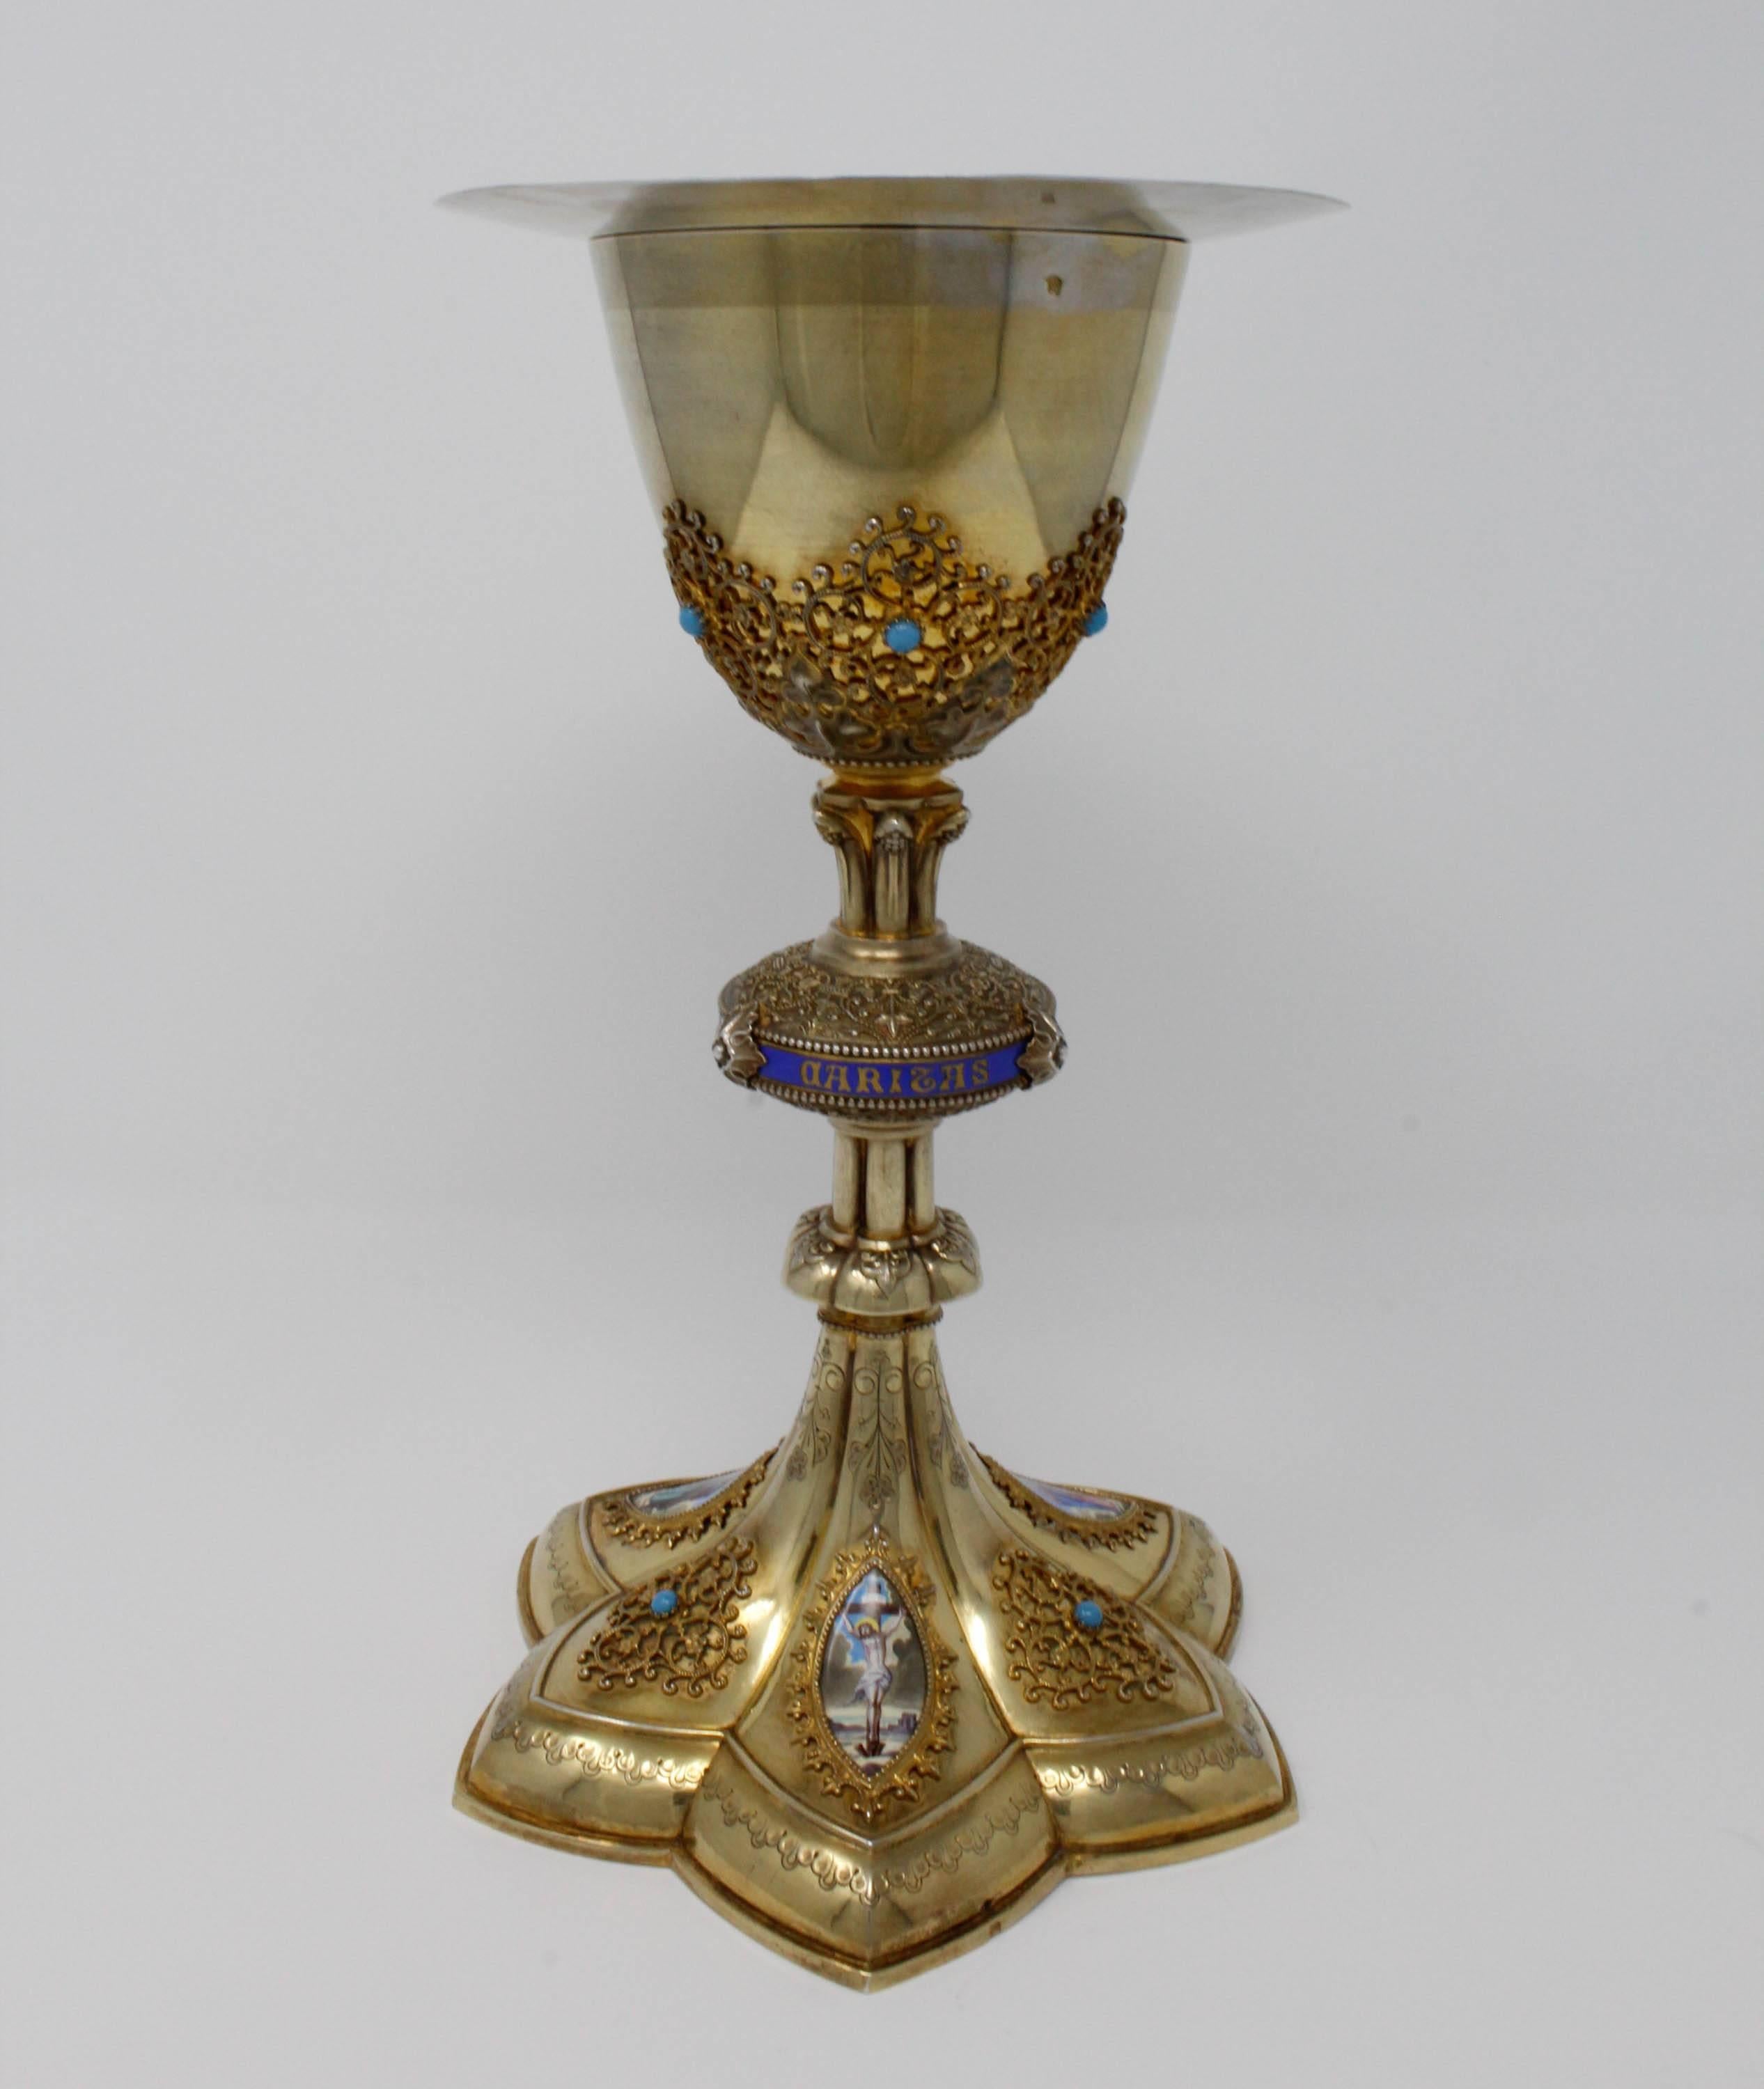 Chalice/ Paten, Silver Gilt, Louis Giles, Lyon. Silver & silver gilt neo-gothic chalice featuring three hand-painted Limoges enamel lozenges, round gem set turquoise, applied filigree, and an enameled central 